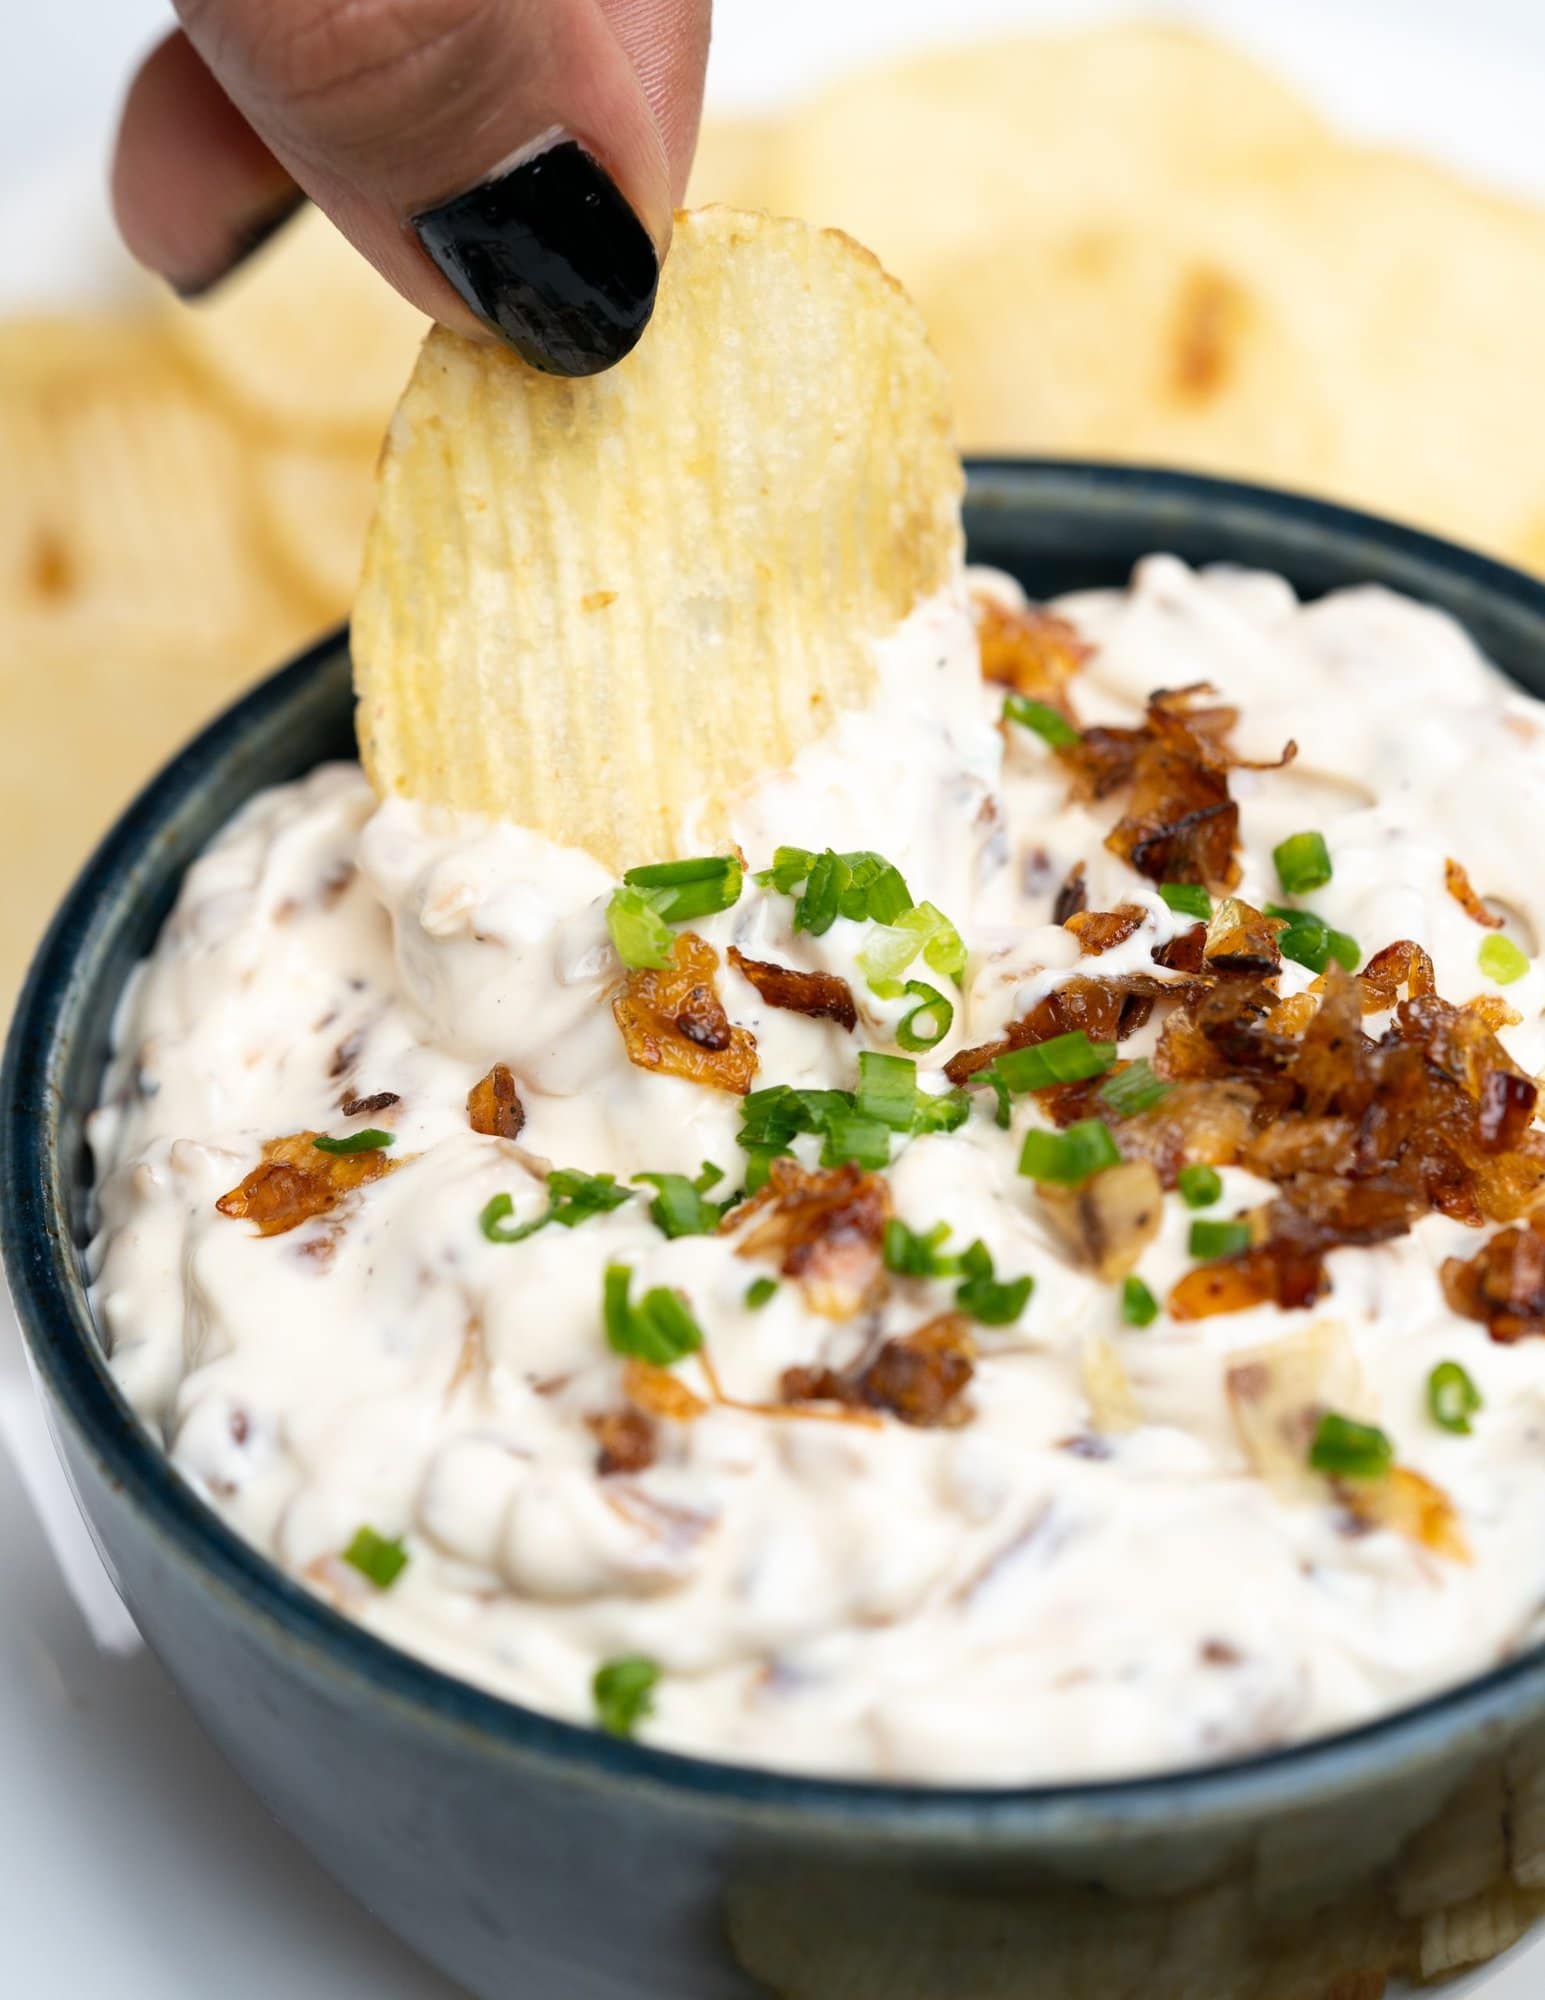 French onion dip garnished with chives and caramelized onion. Served with potato chips. 